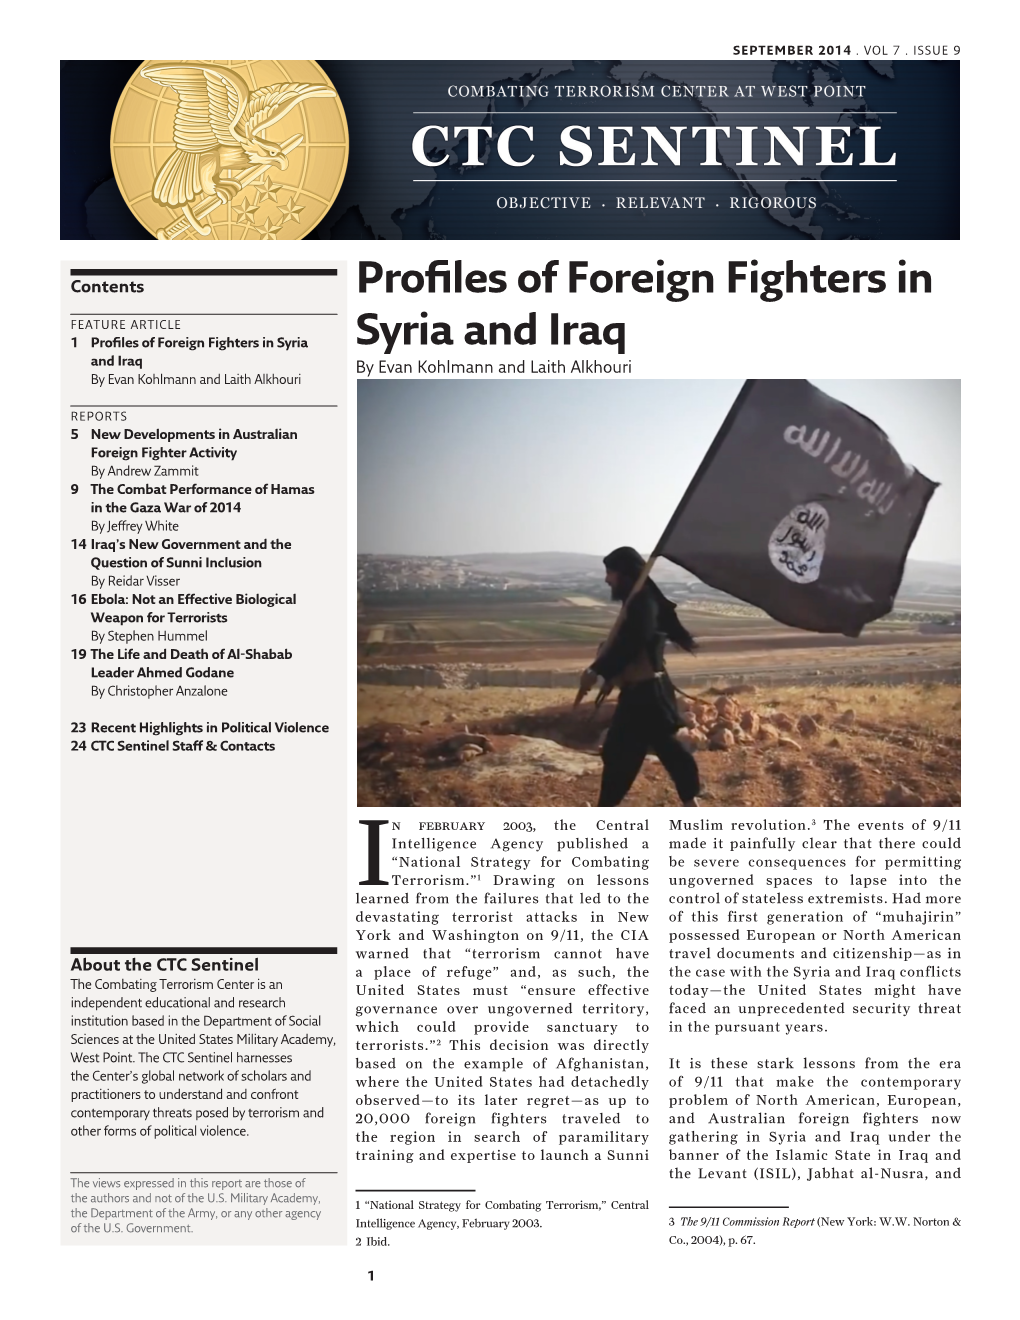 Profiles of Foreign Fighters in Syria and Iraq